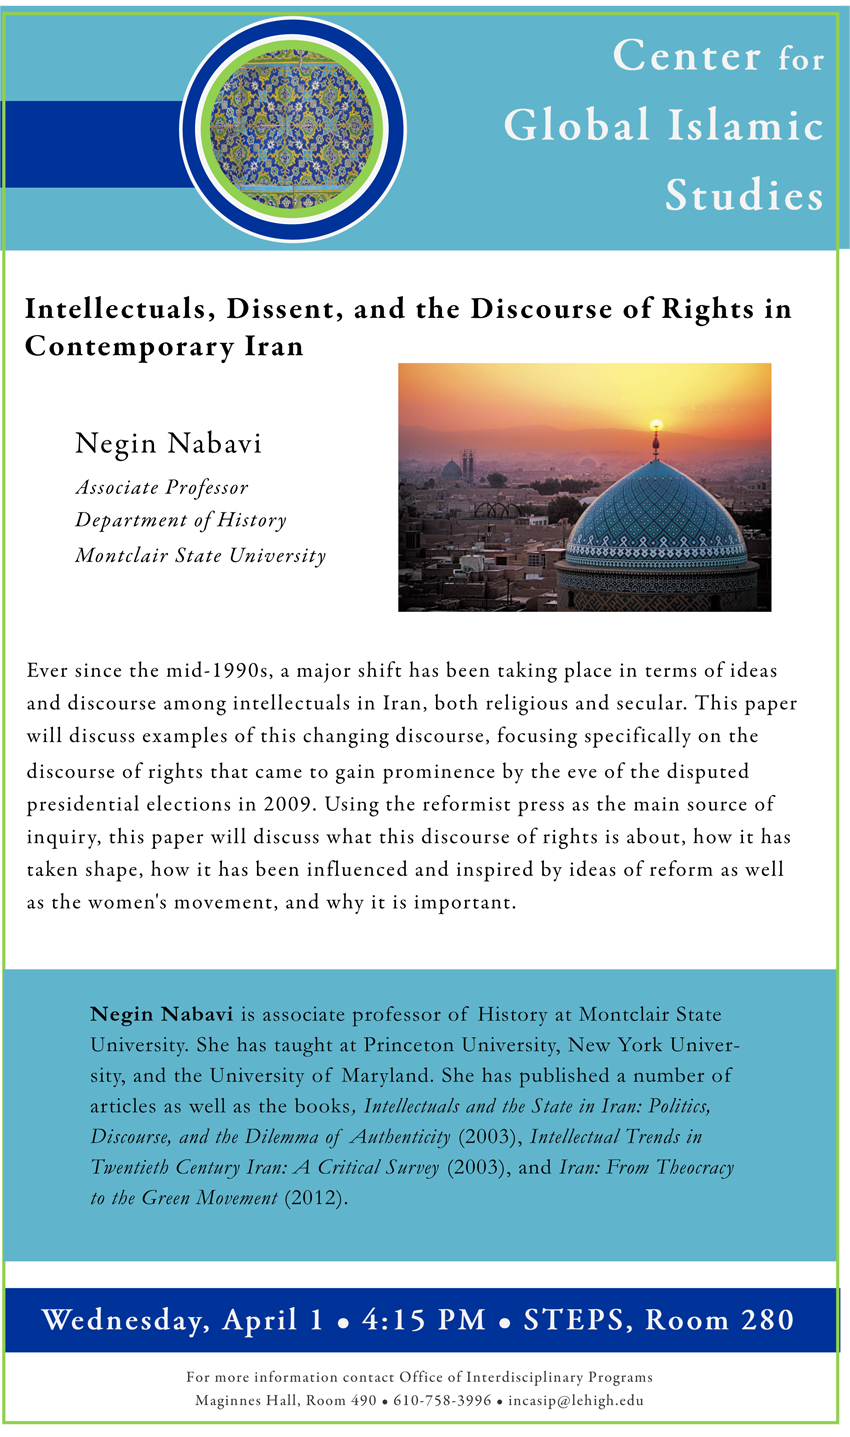 A major shift has been taking place in terms of ideas and discourse among intellectuals in Iran, both religious and secular. This paper will discuss examples of this changing discourse.